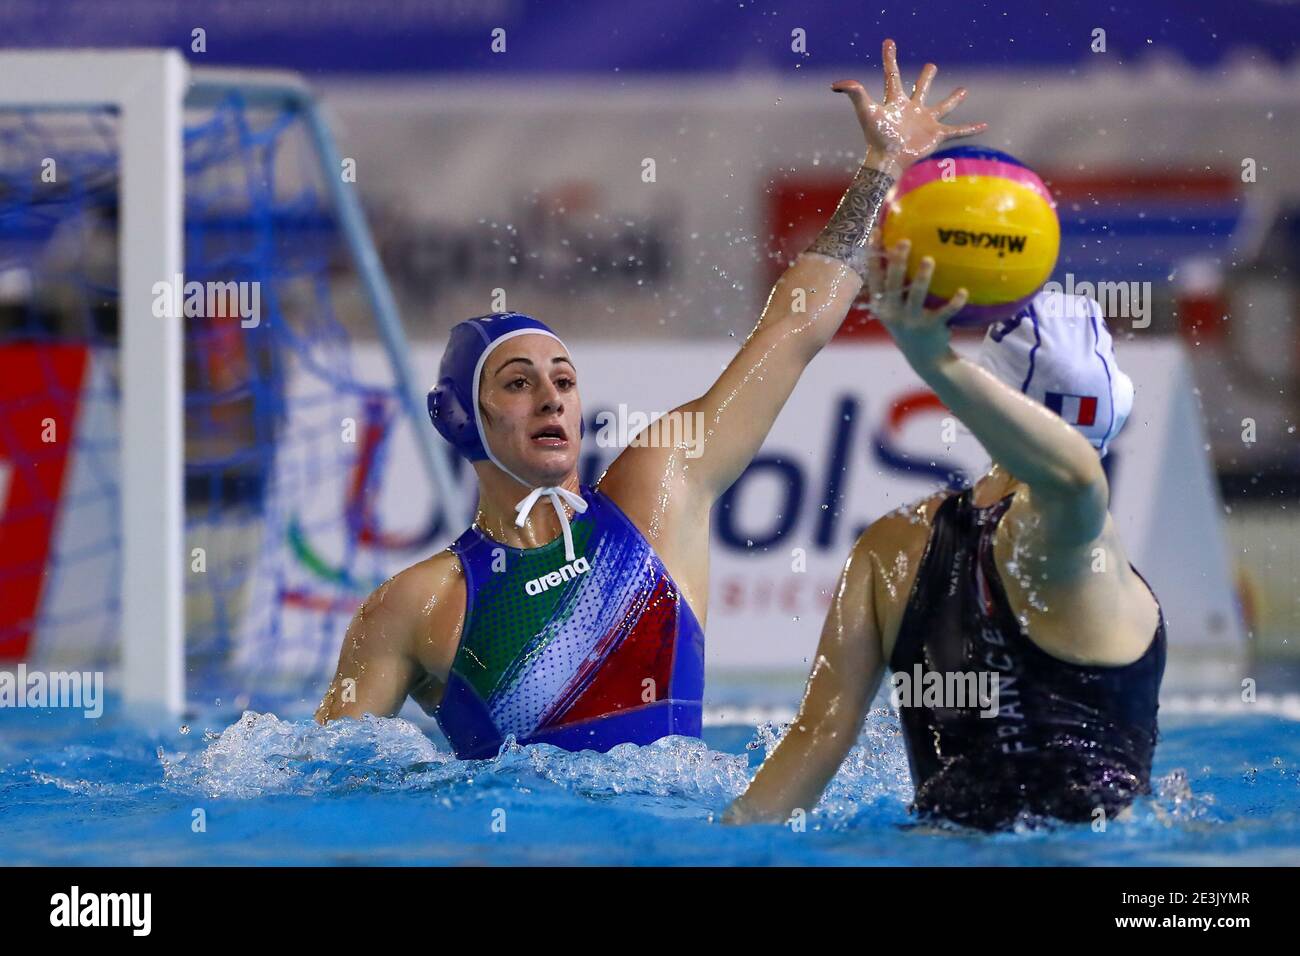 TRIESTE, ITALY - JANUARY 19: Claudia Roberta Marletta of Italy, Ema Martine  Vernoux of France during the match between France and Italy at Women's  Water Polo Olympic Games Qualification Tournament at Bruno